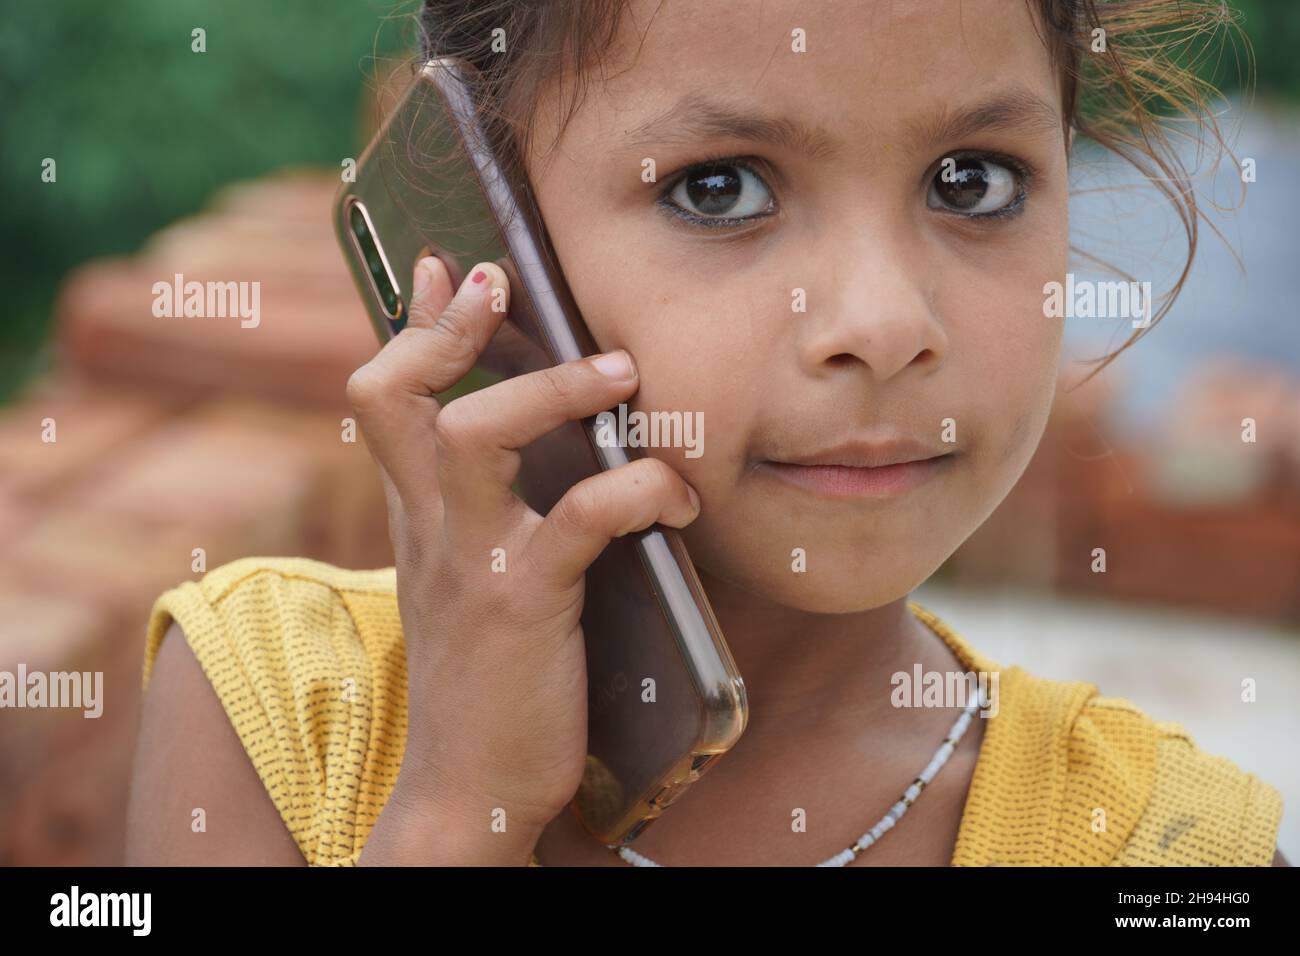 A cute girl talking on mobile phone Stock Photo